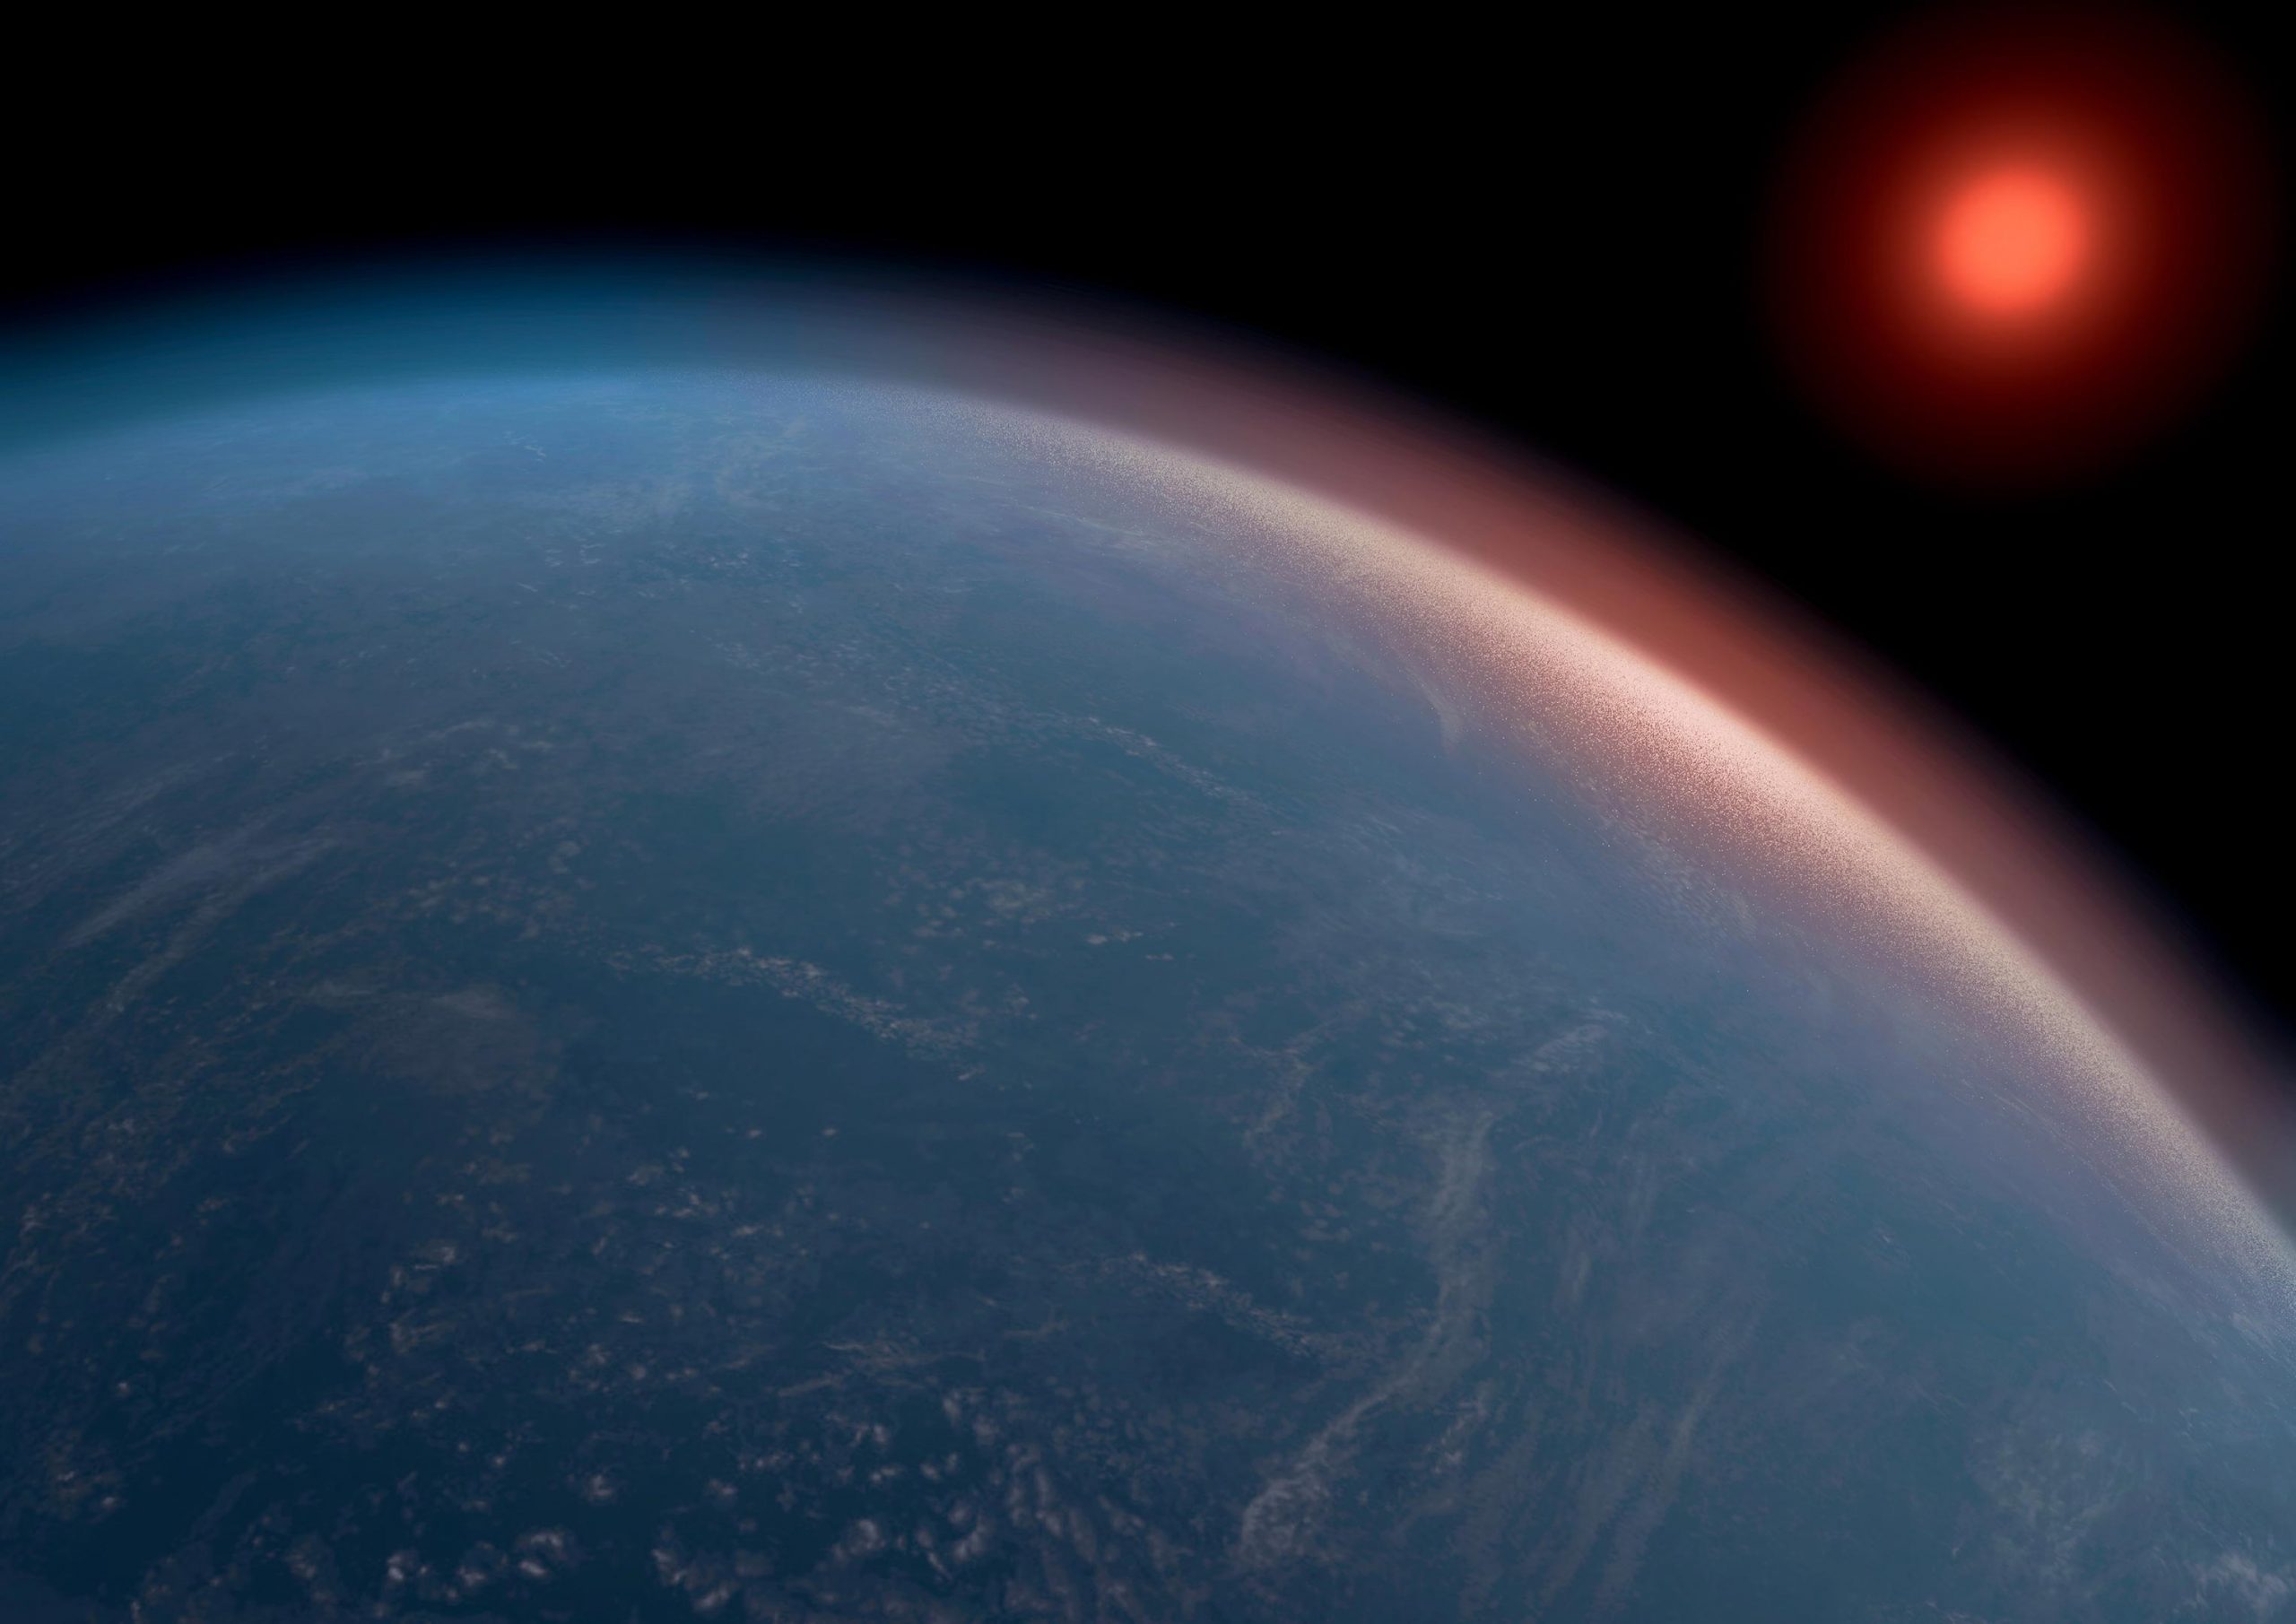 Earth 2.0? Astronomers Discover Large Exoplanet That Could Have the Right Conditions for Life